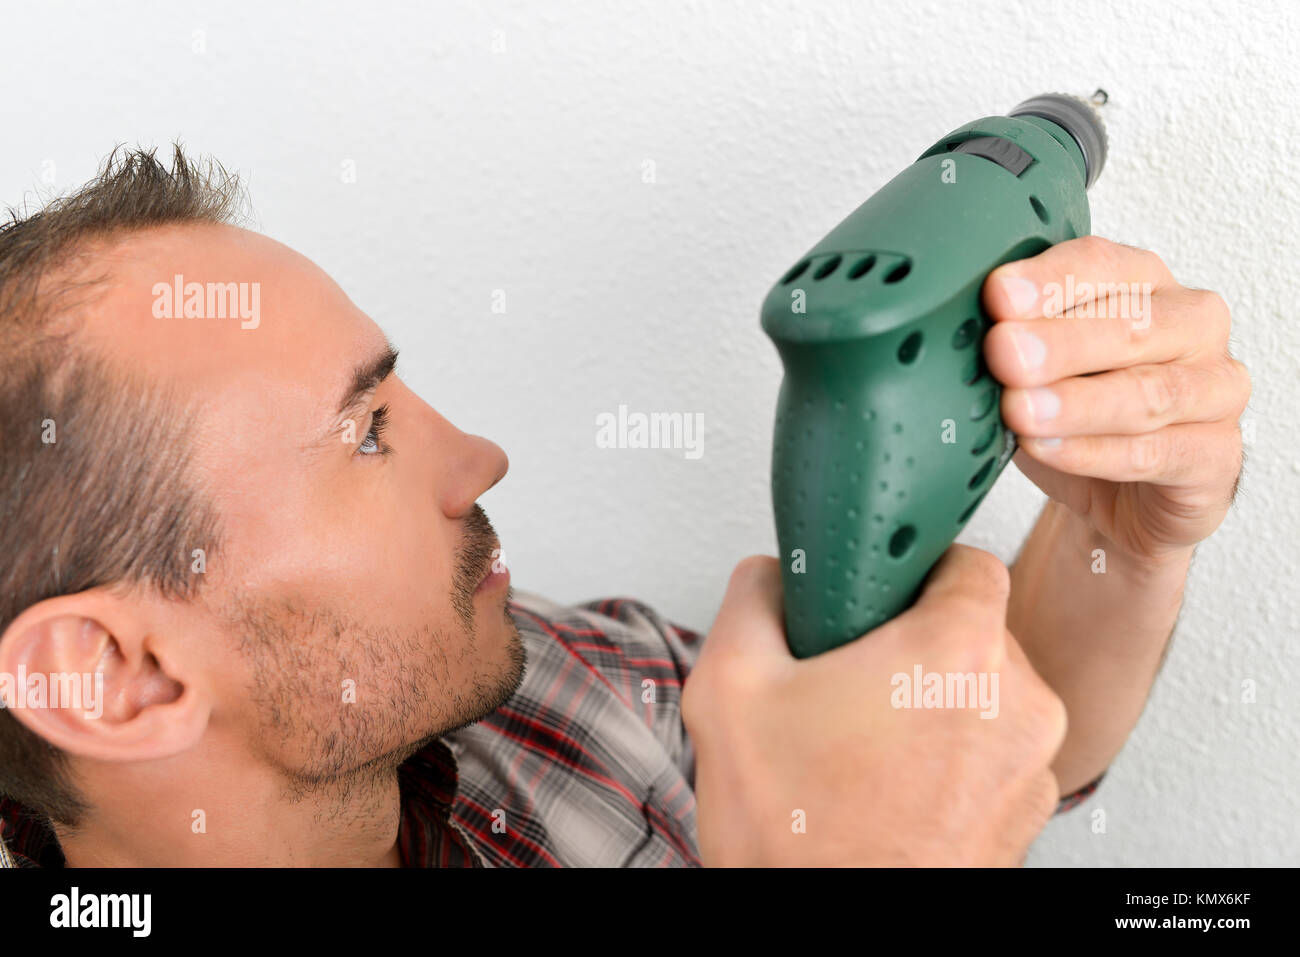 Using a cordless power drill Stock Photo